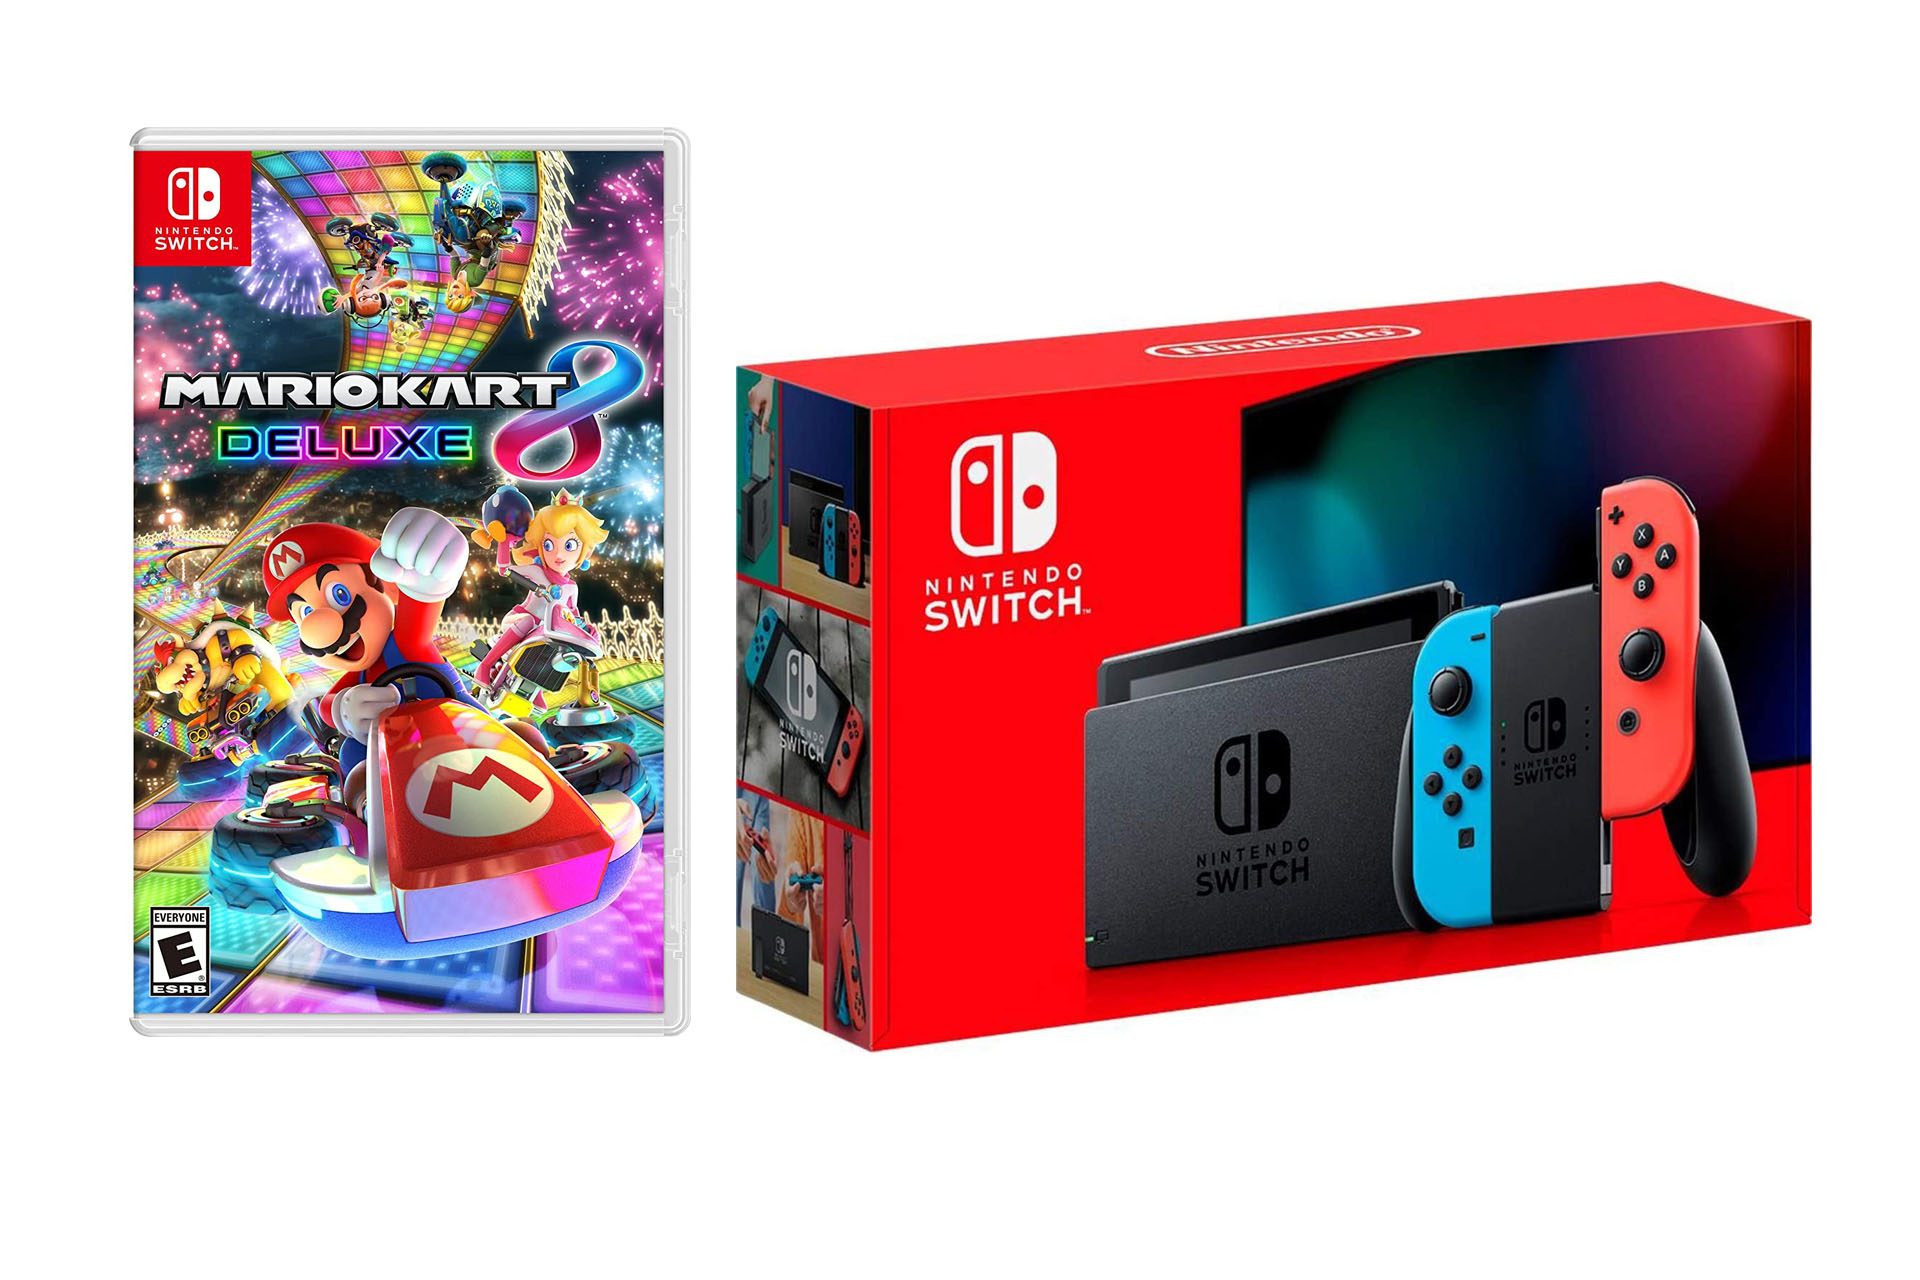 Product shots of the Nintendo Switch console box and Mario Kart 8